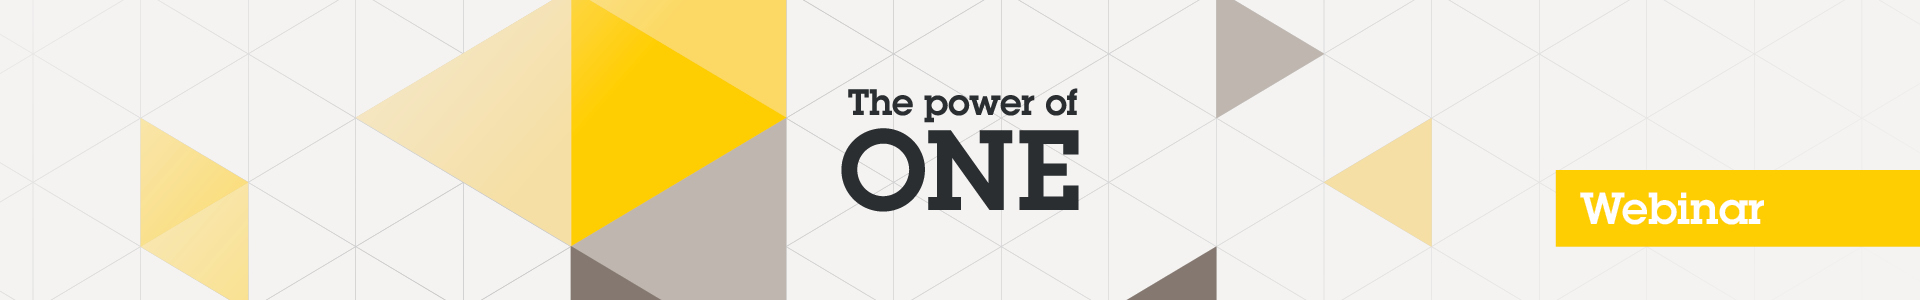 The Power of ONE - Webinar Axis